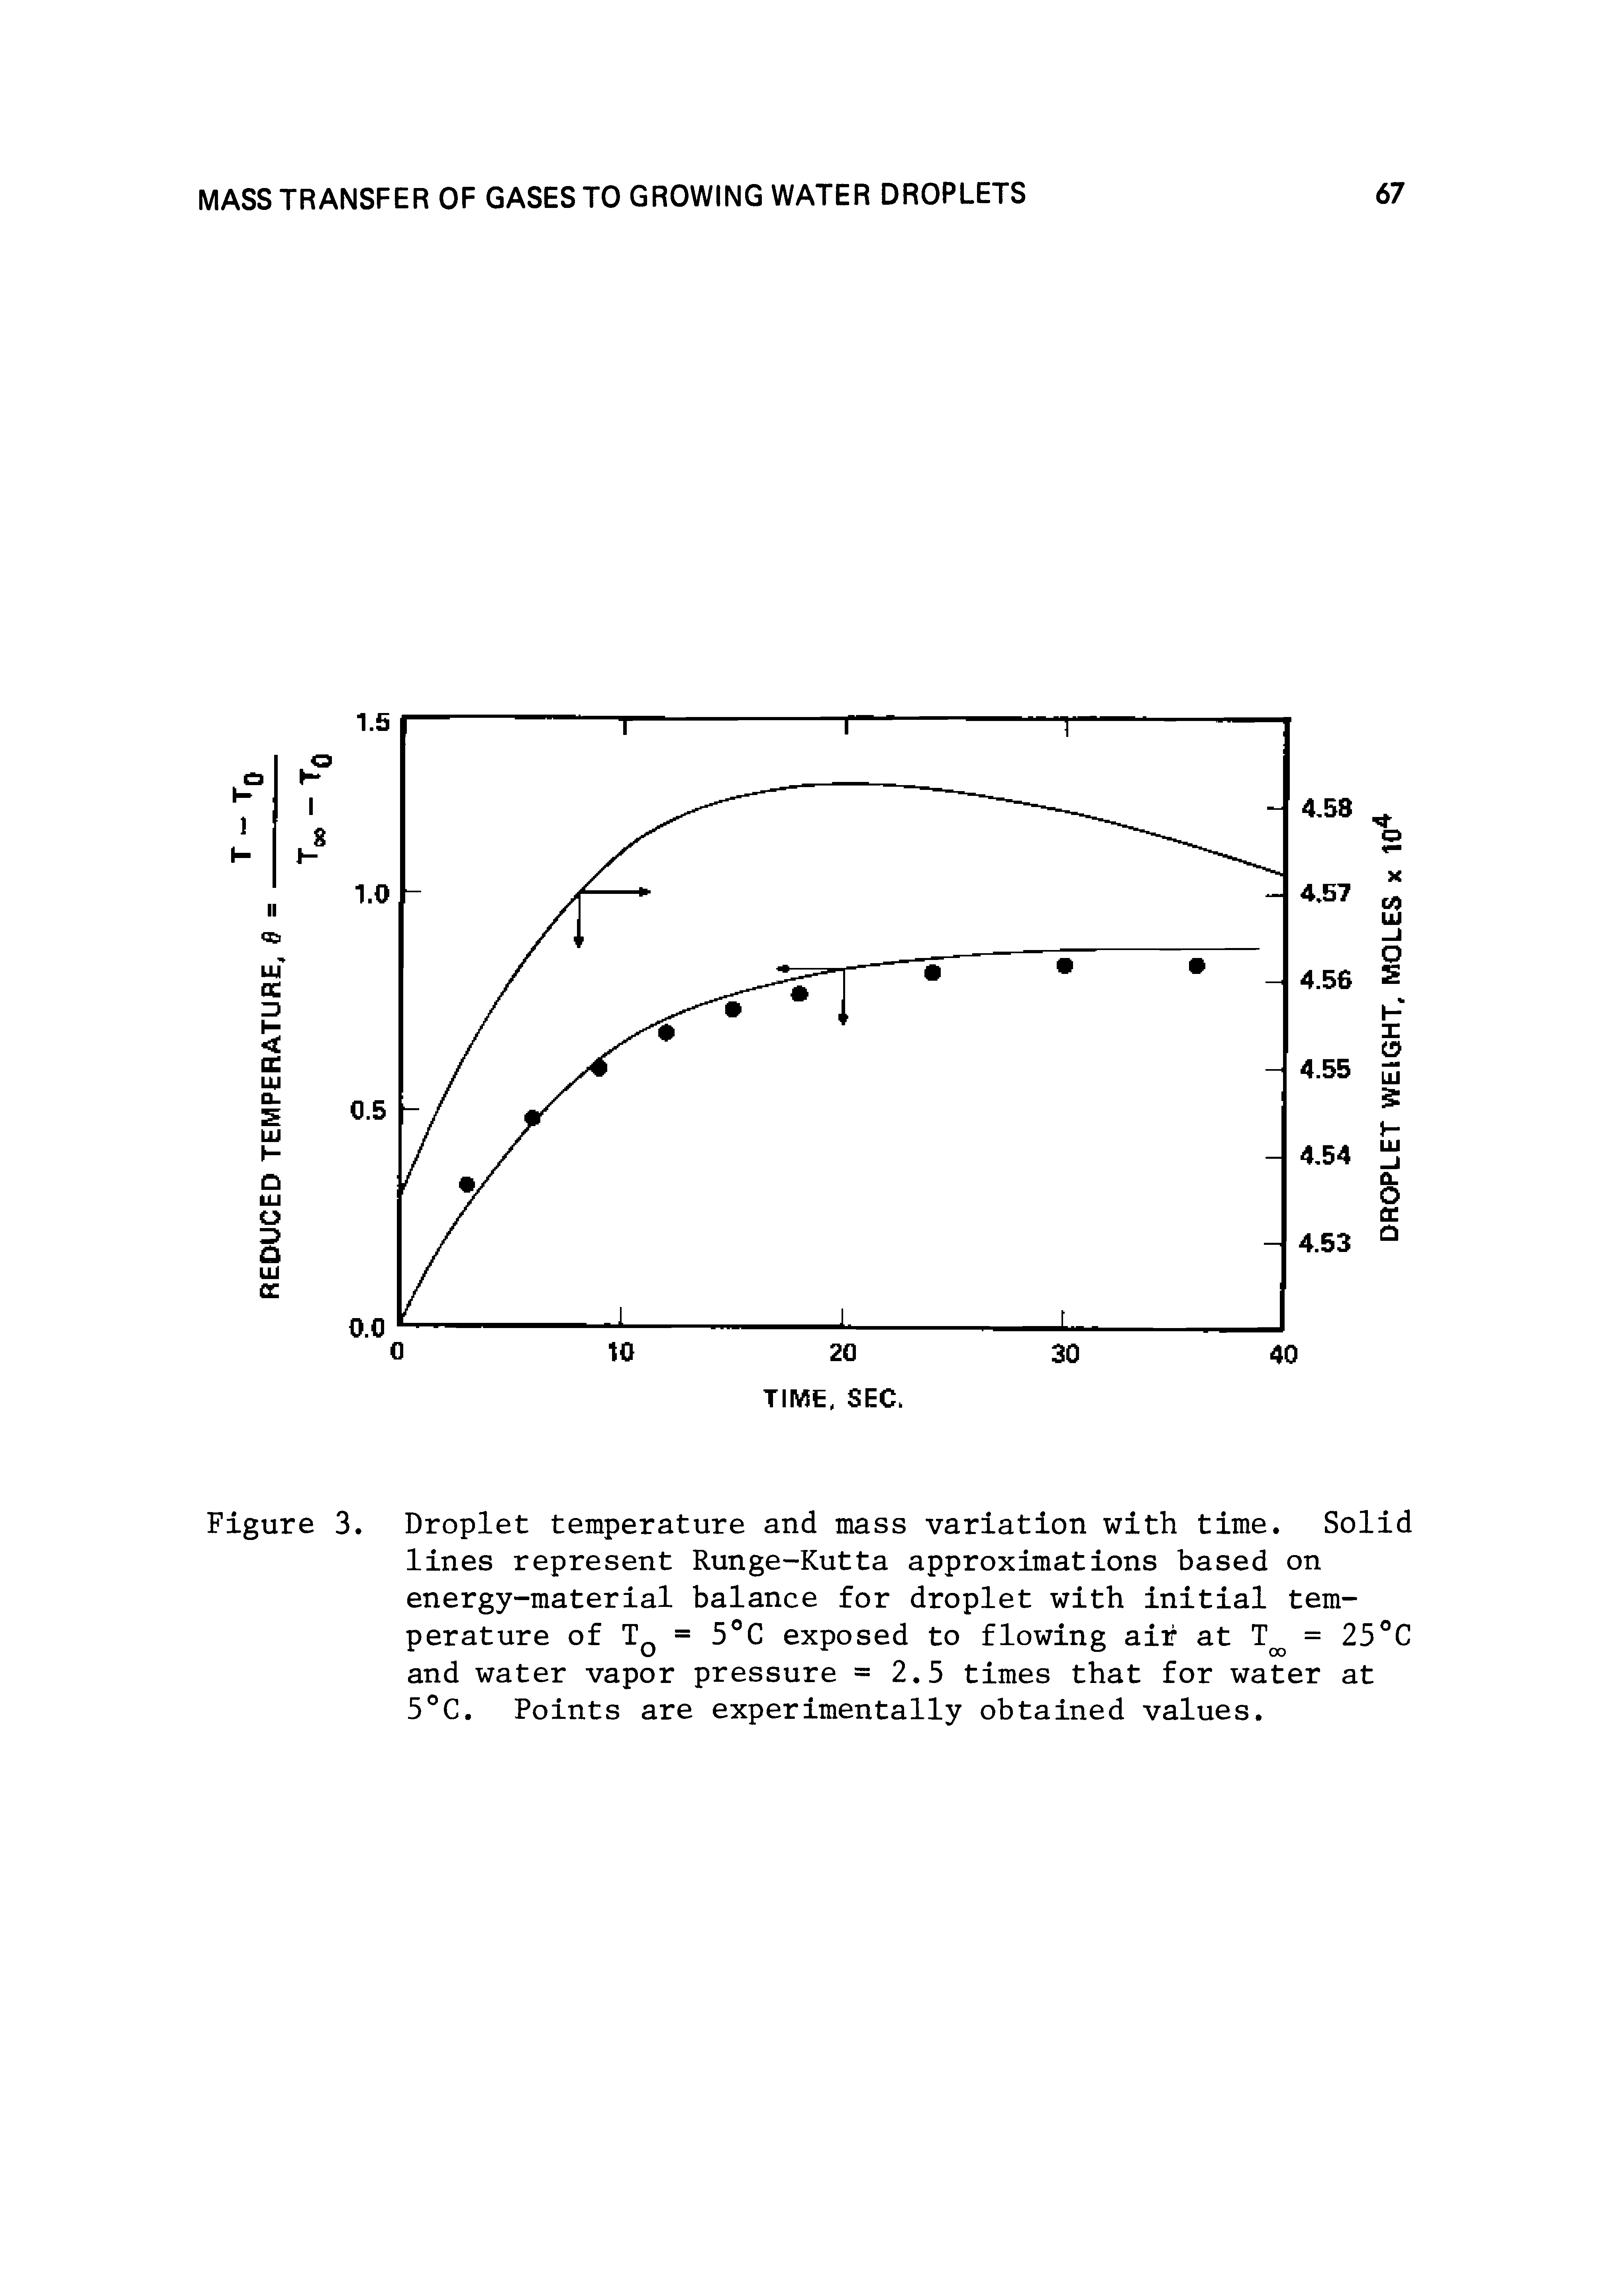 Figure 3. Droplet temperature and mass variation with time. Solid lines represent Runge-Kutta approximations based on energy-material balance for droplet with initial temperature of Tq = 5°C exposed to flowing air at = 25°C and water vapor pressure = 2.5 times that for water at 5 C. Points are experimentally obtained values.